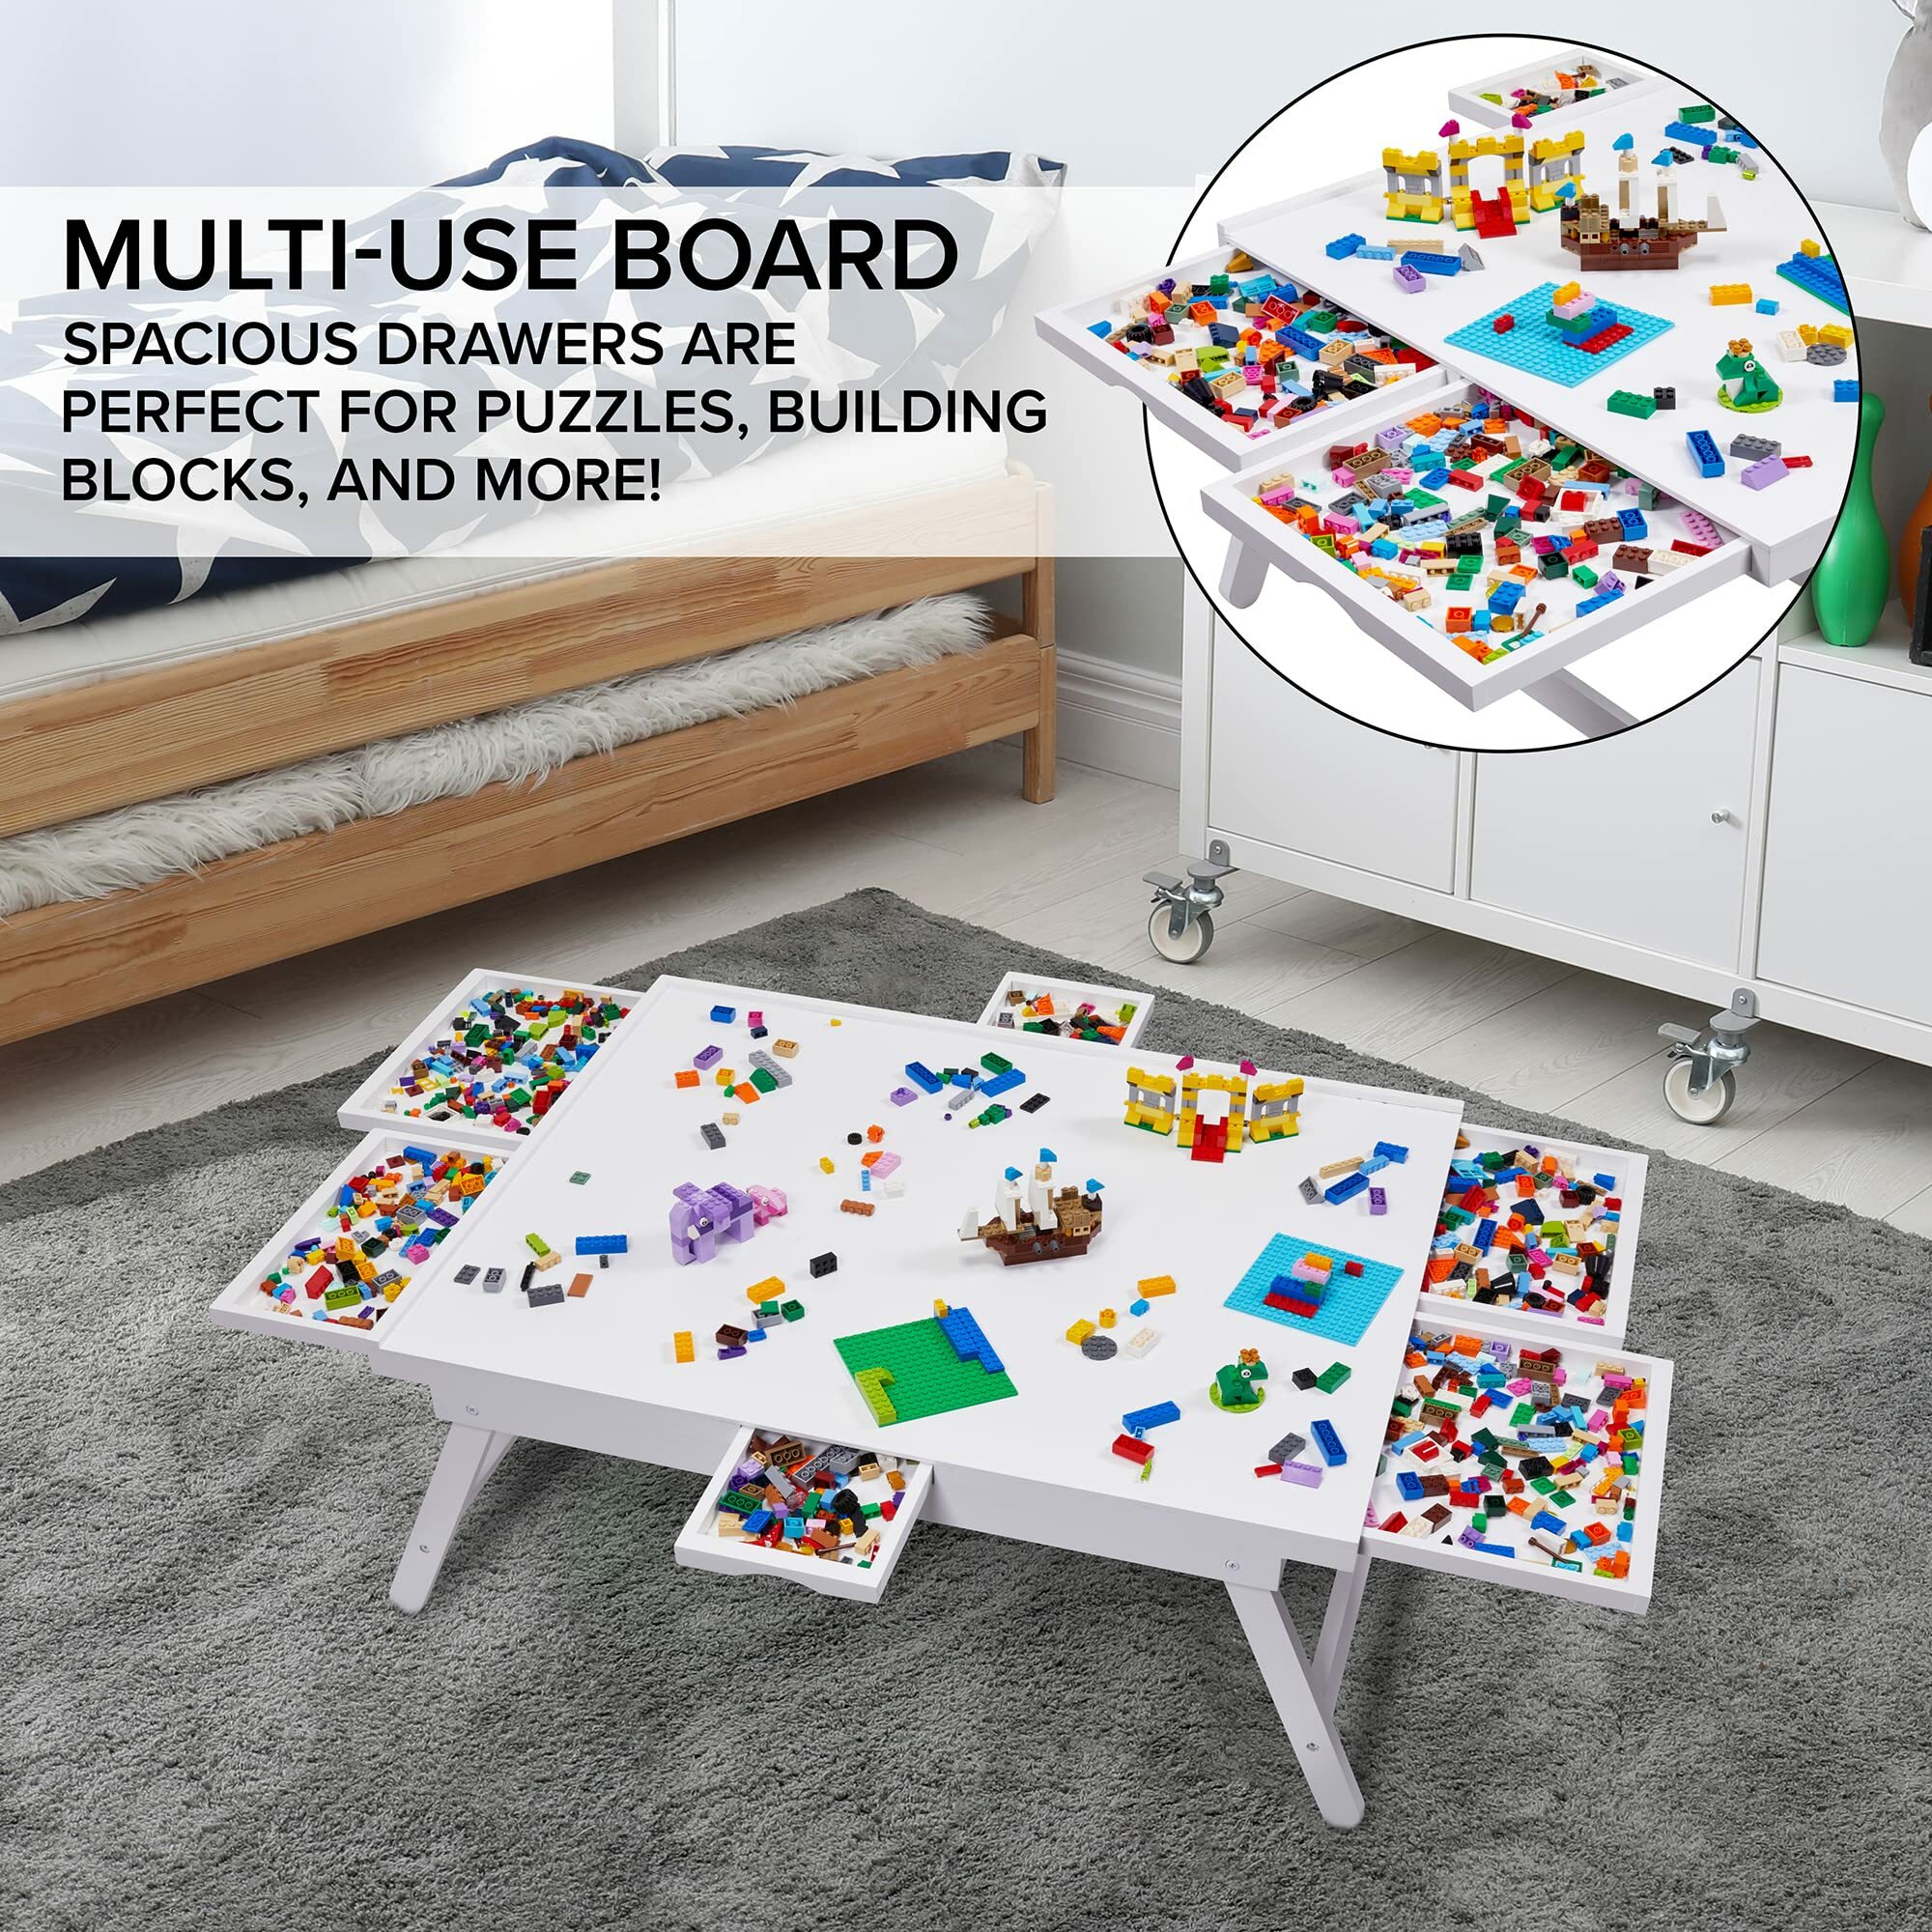 Jumbl 1500 Piece Puzzle Board, 27” x 35” Jigsaw Puzzle Table